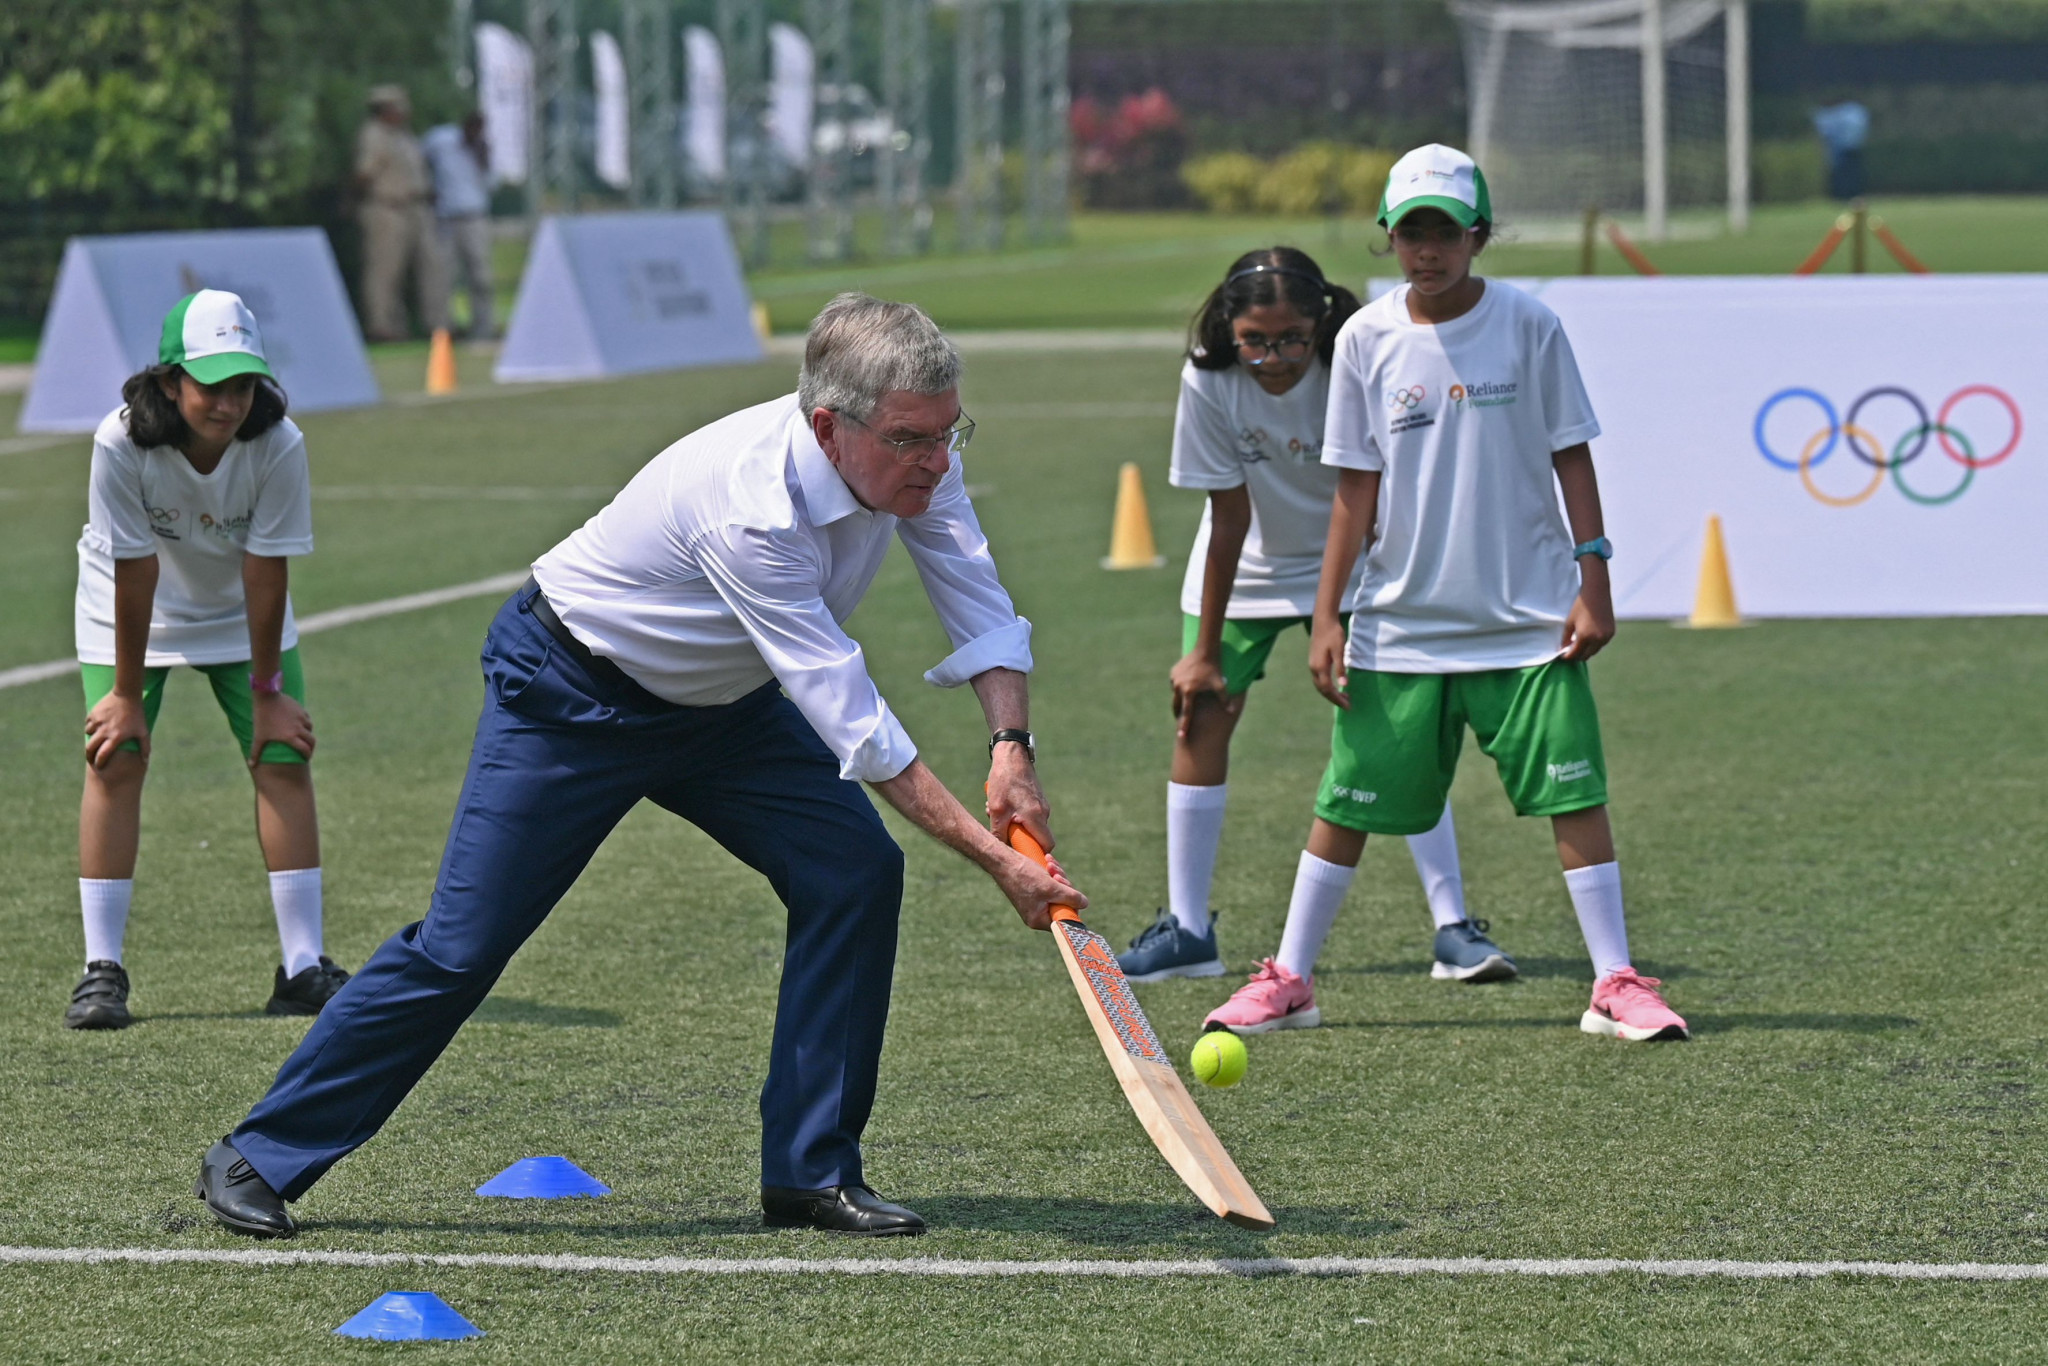 Current IOC President Thomas Bach played cricket with a tennis ball in Mumbai earlier this month ©Getty Images